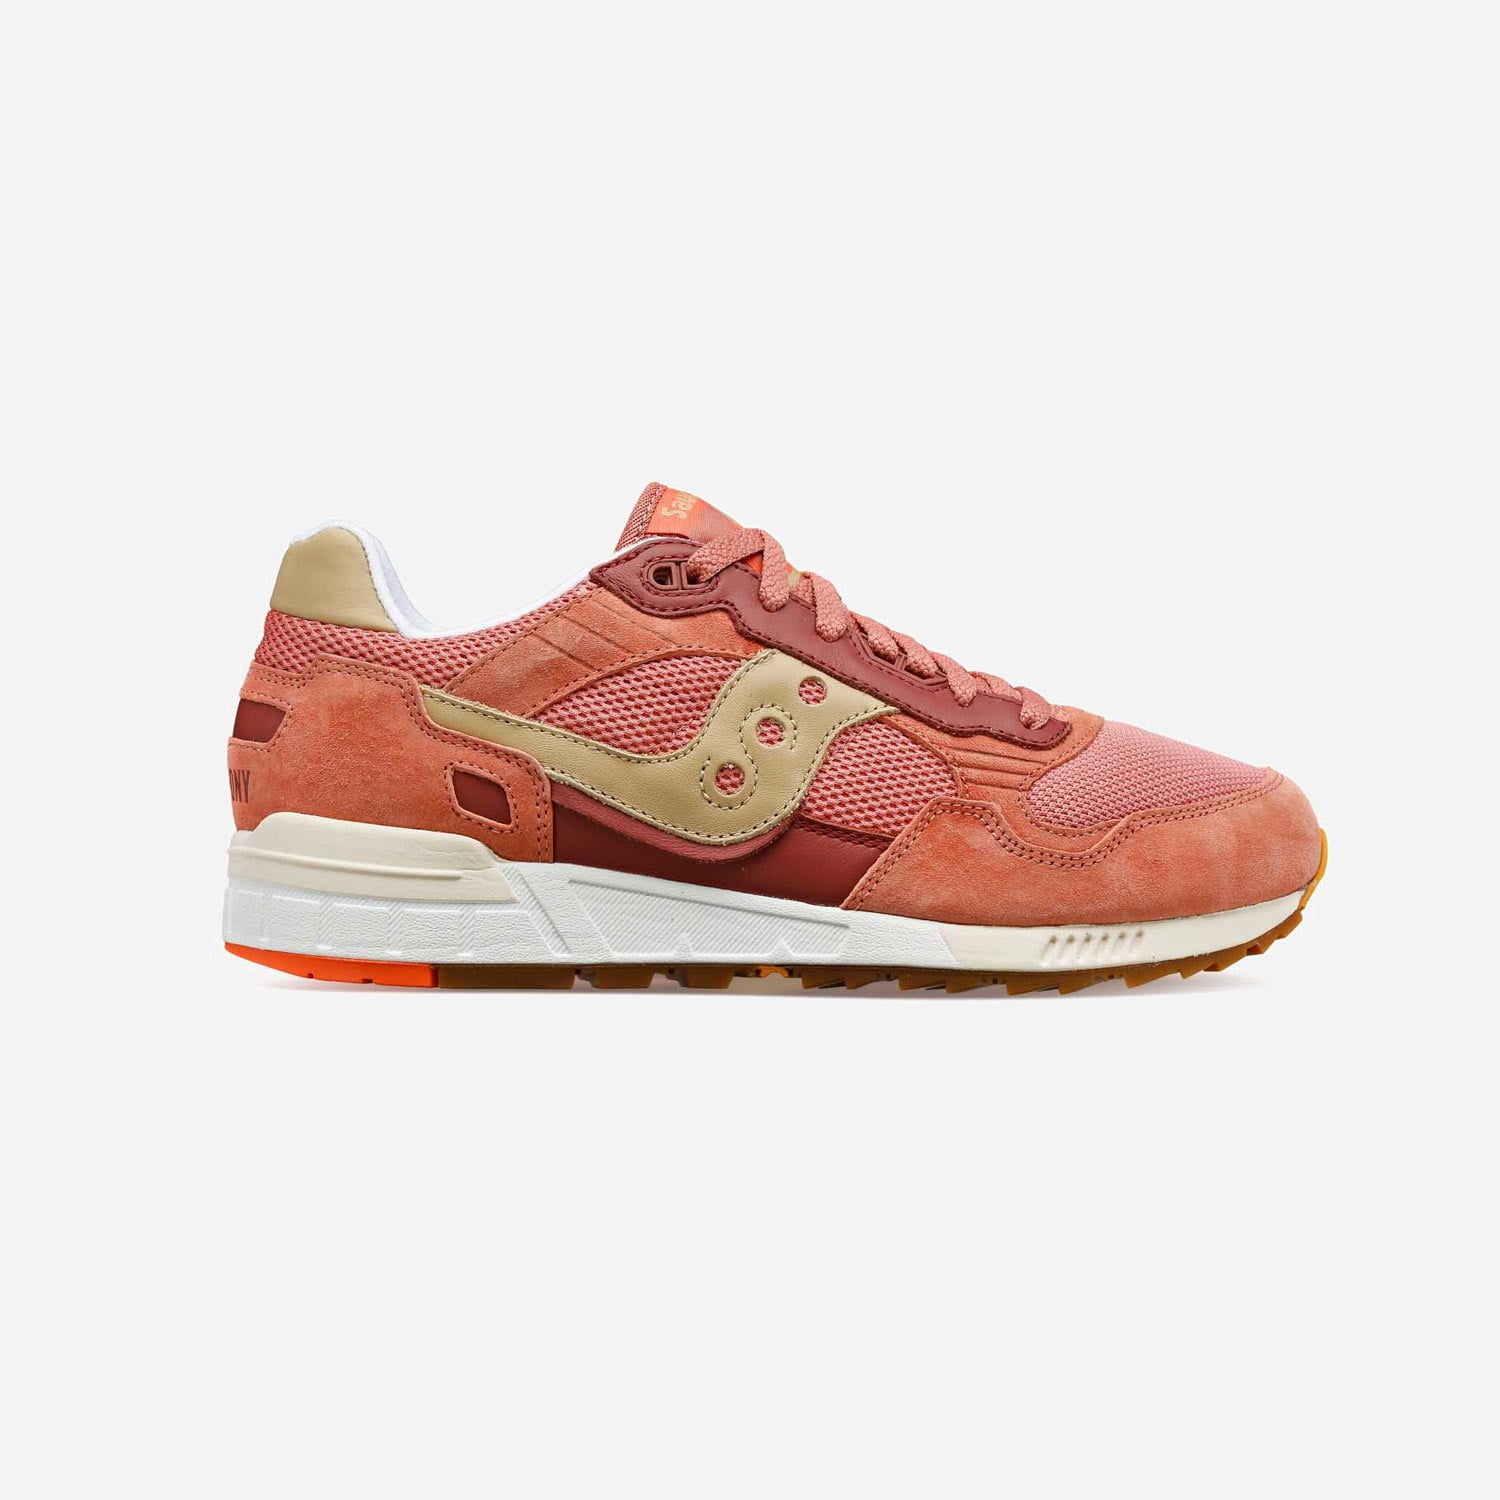 Saucony Shadow 5000 Trainer - Coral/Tan